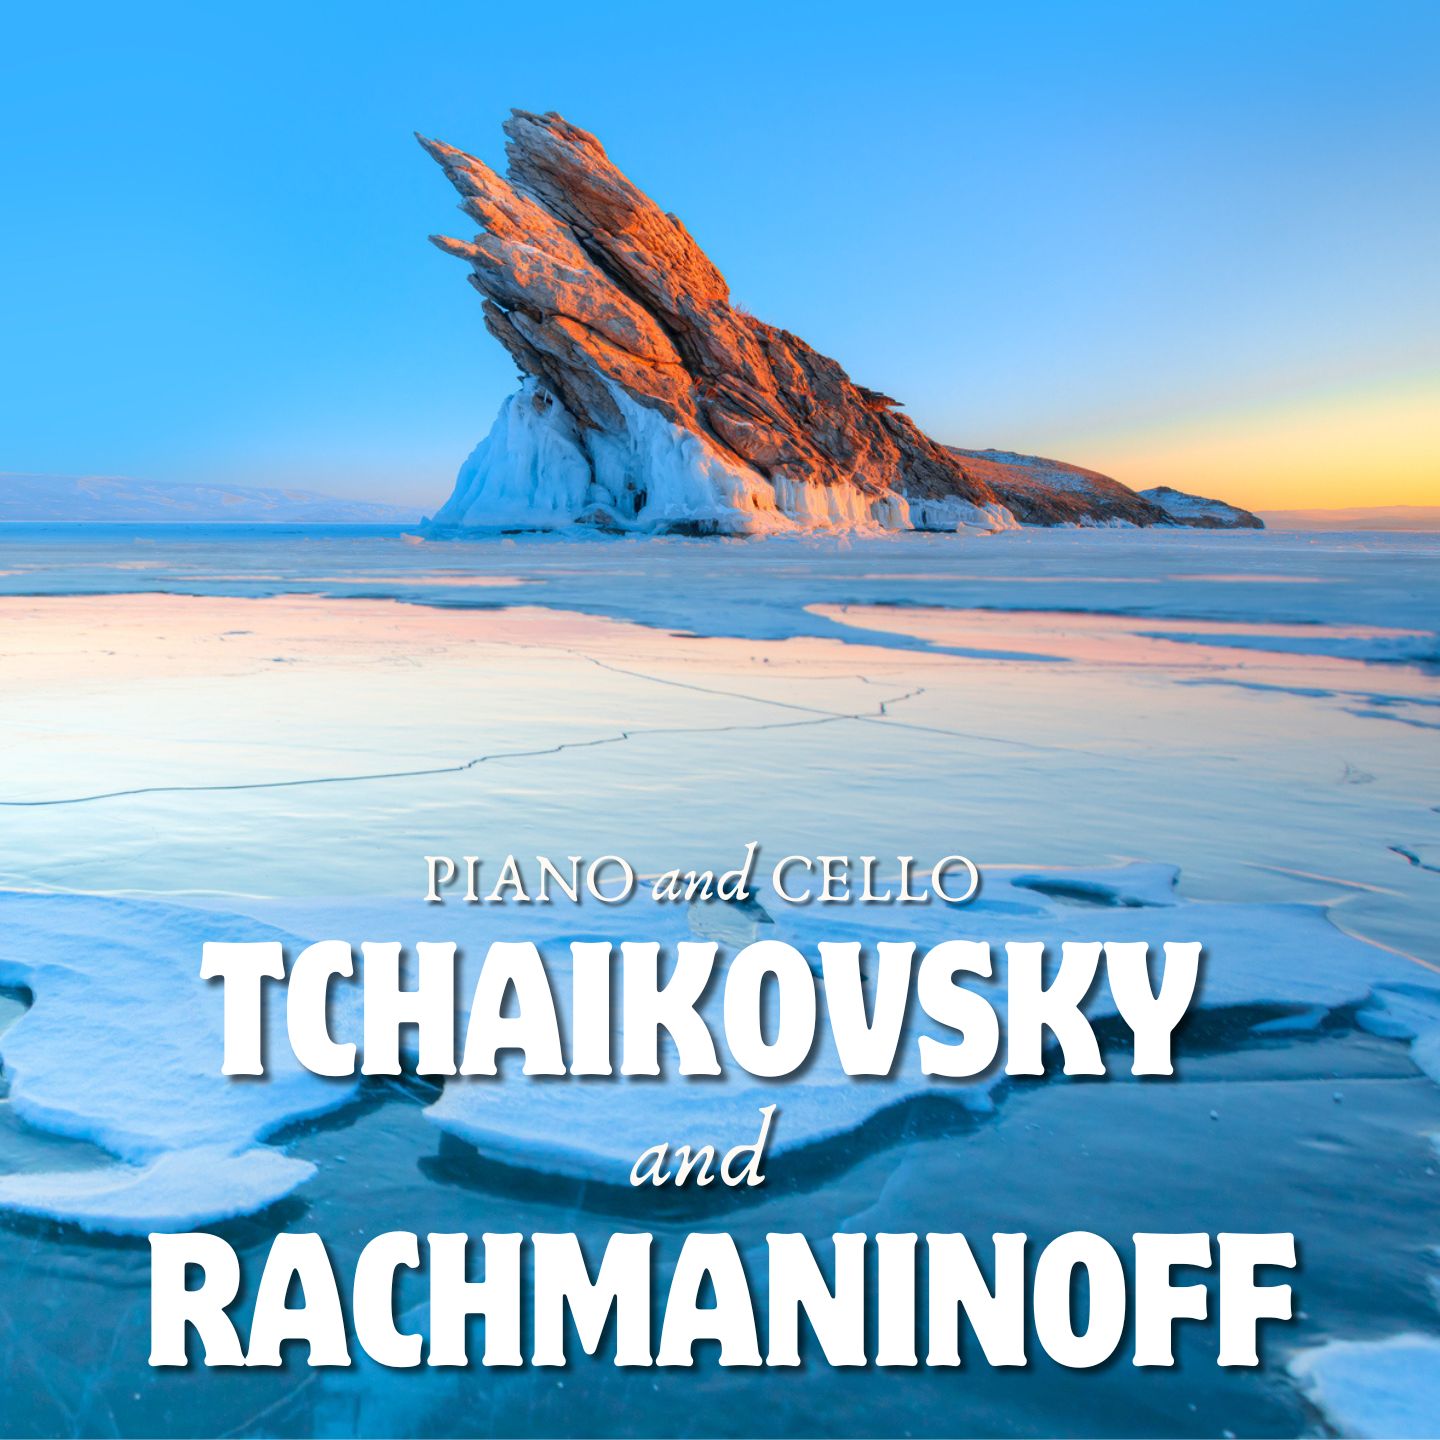 Tchaikovsky and Rachmaninoff: Piano and Cello